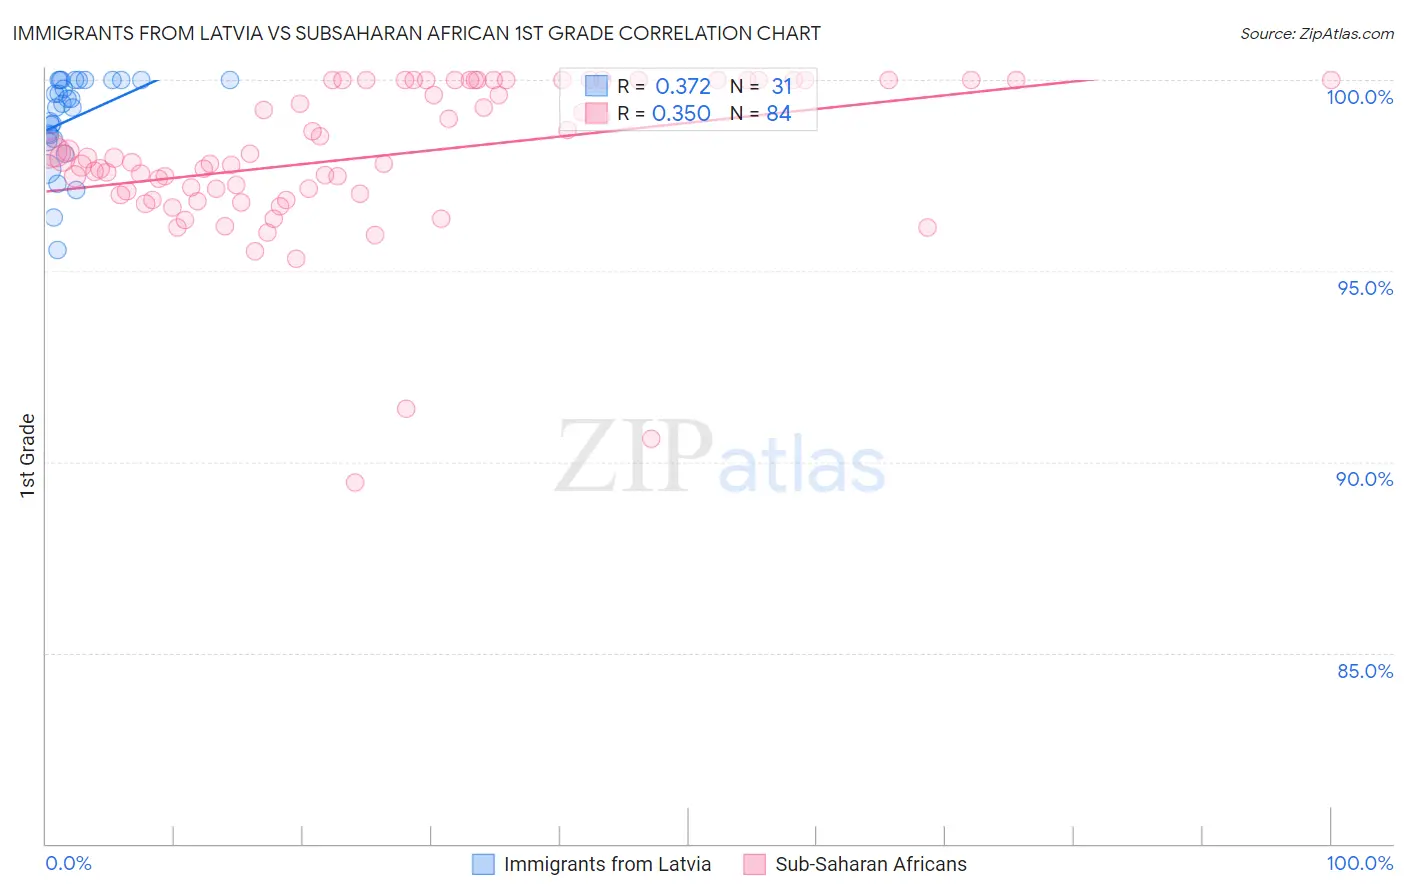 Immigrants from Latvia vs Subsaharan African 1st Grade